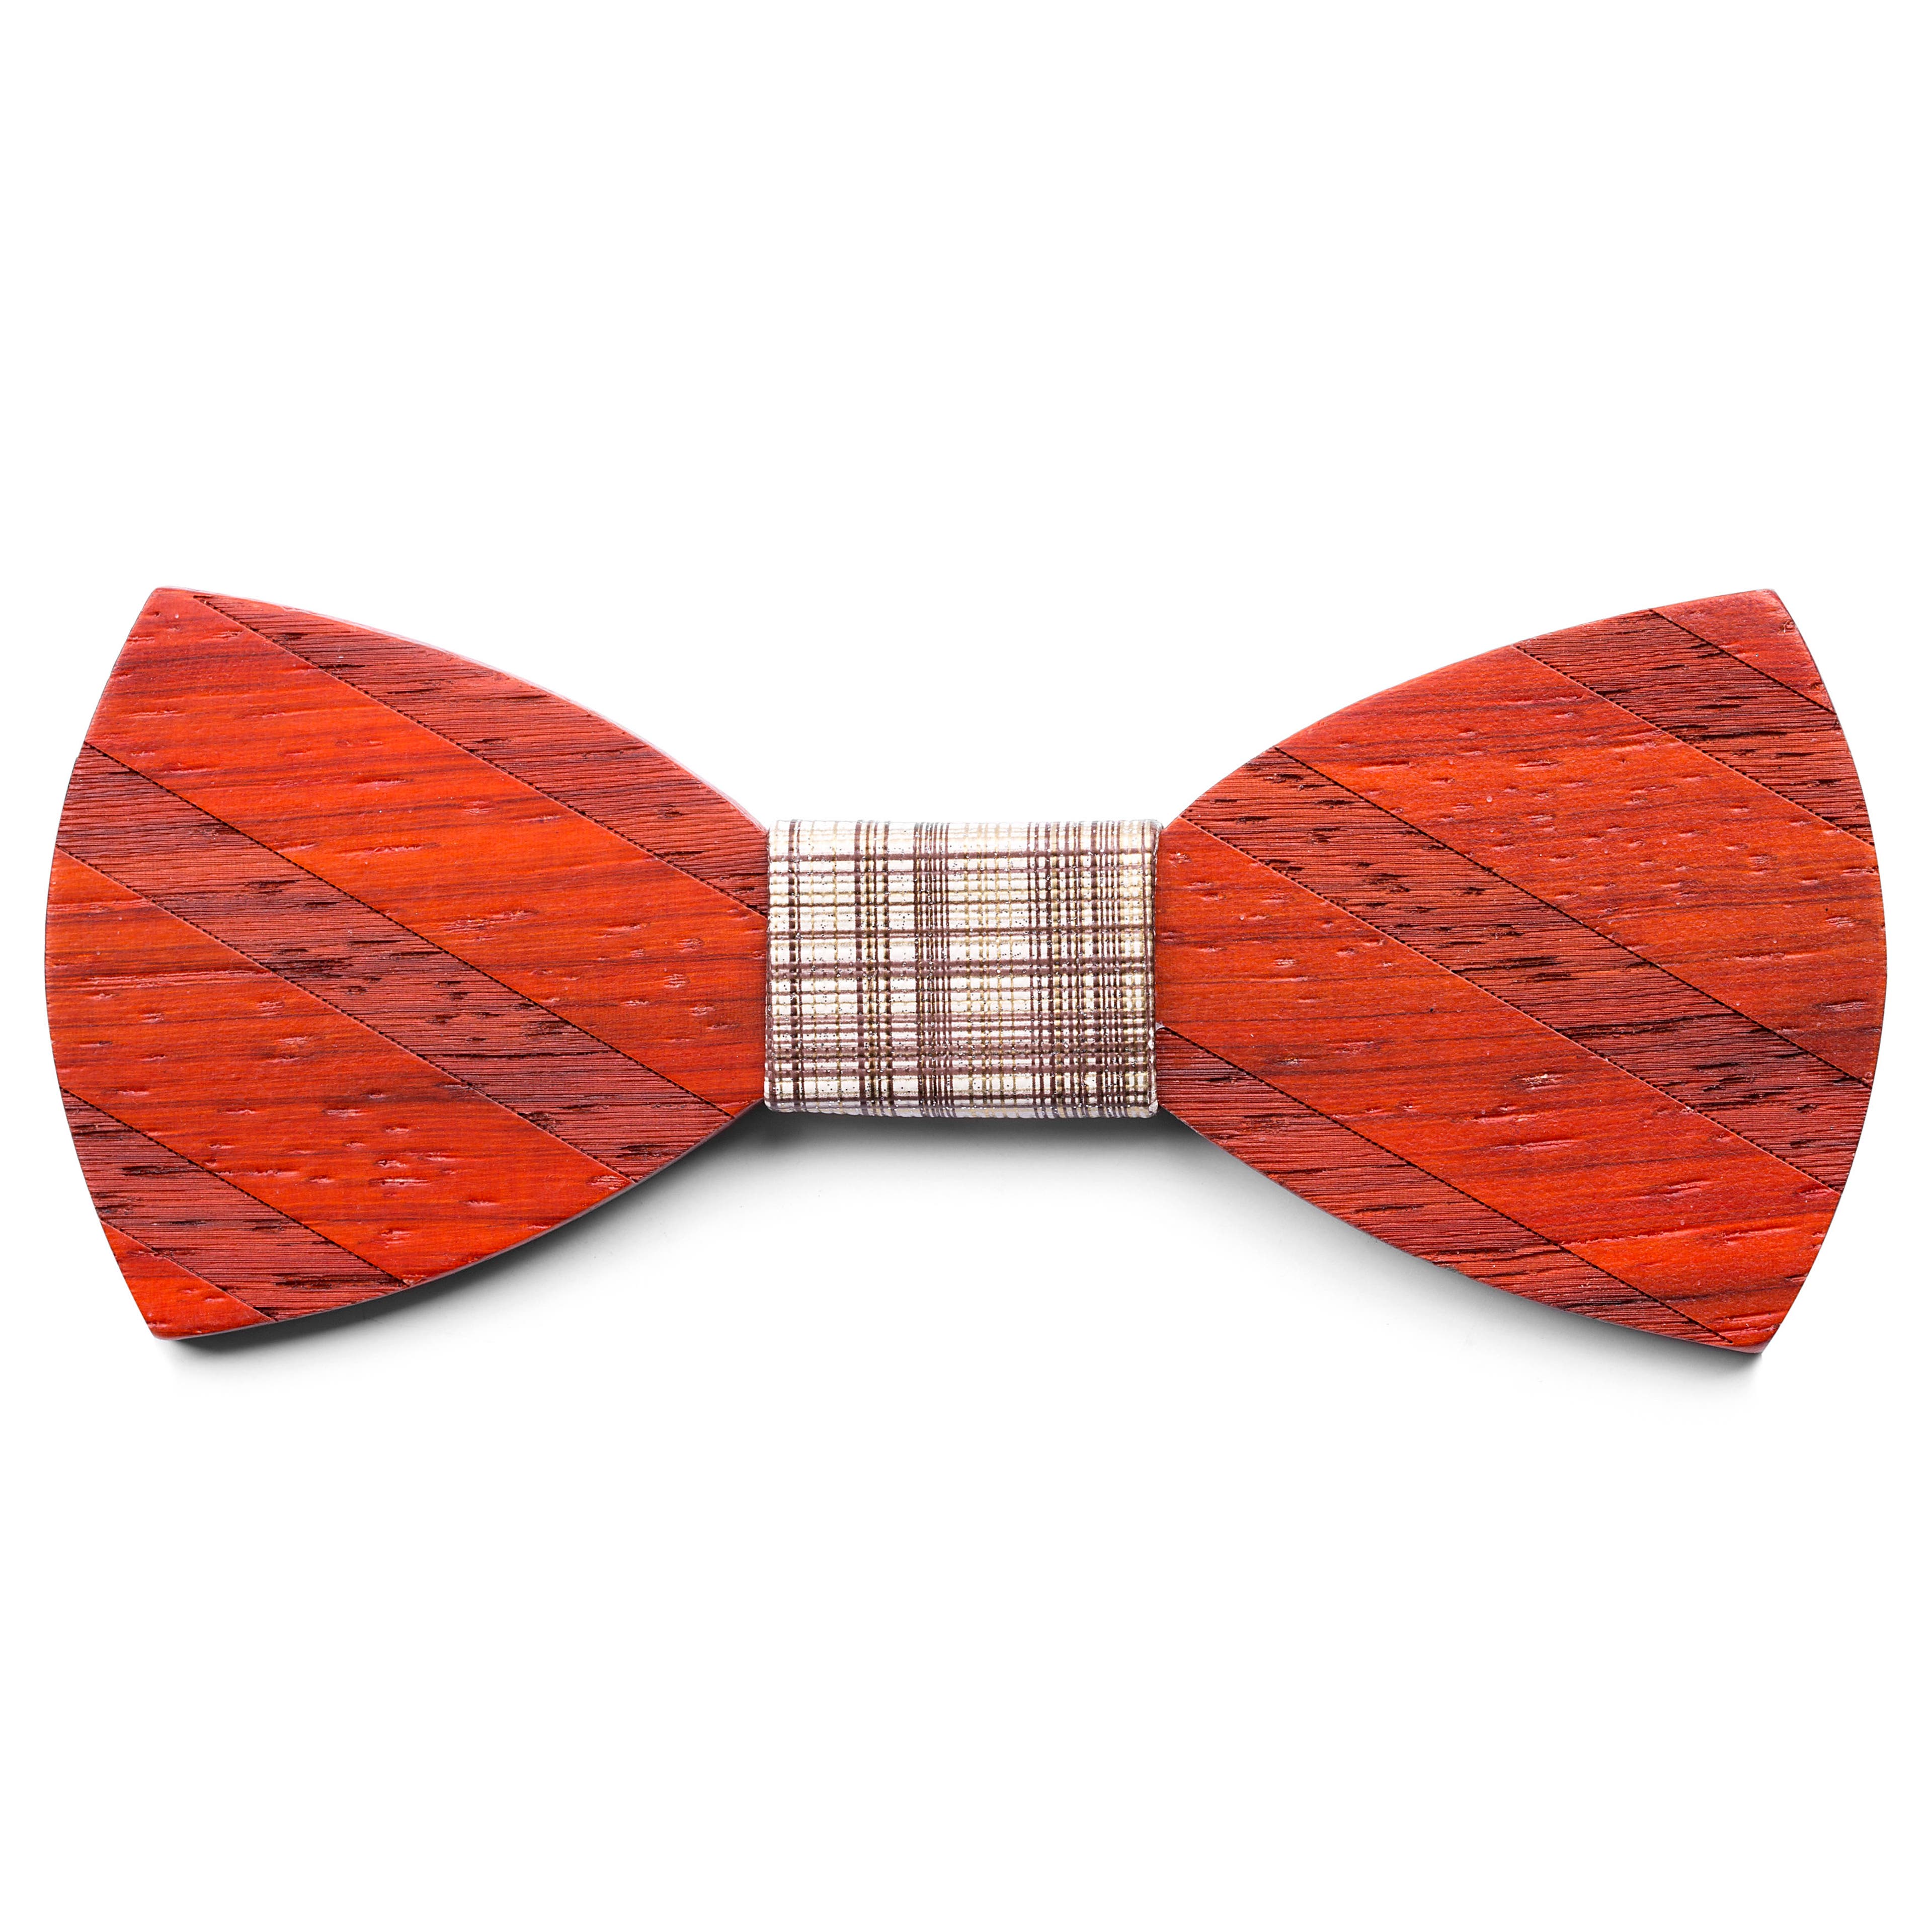 True & Golf Red Rosewood Bow Tie With Striped Fabric Detail